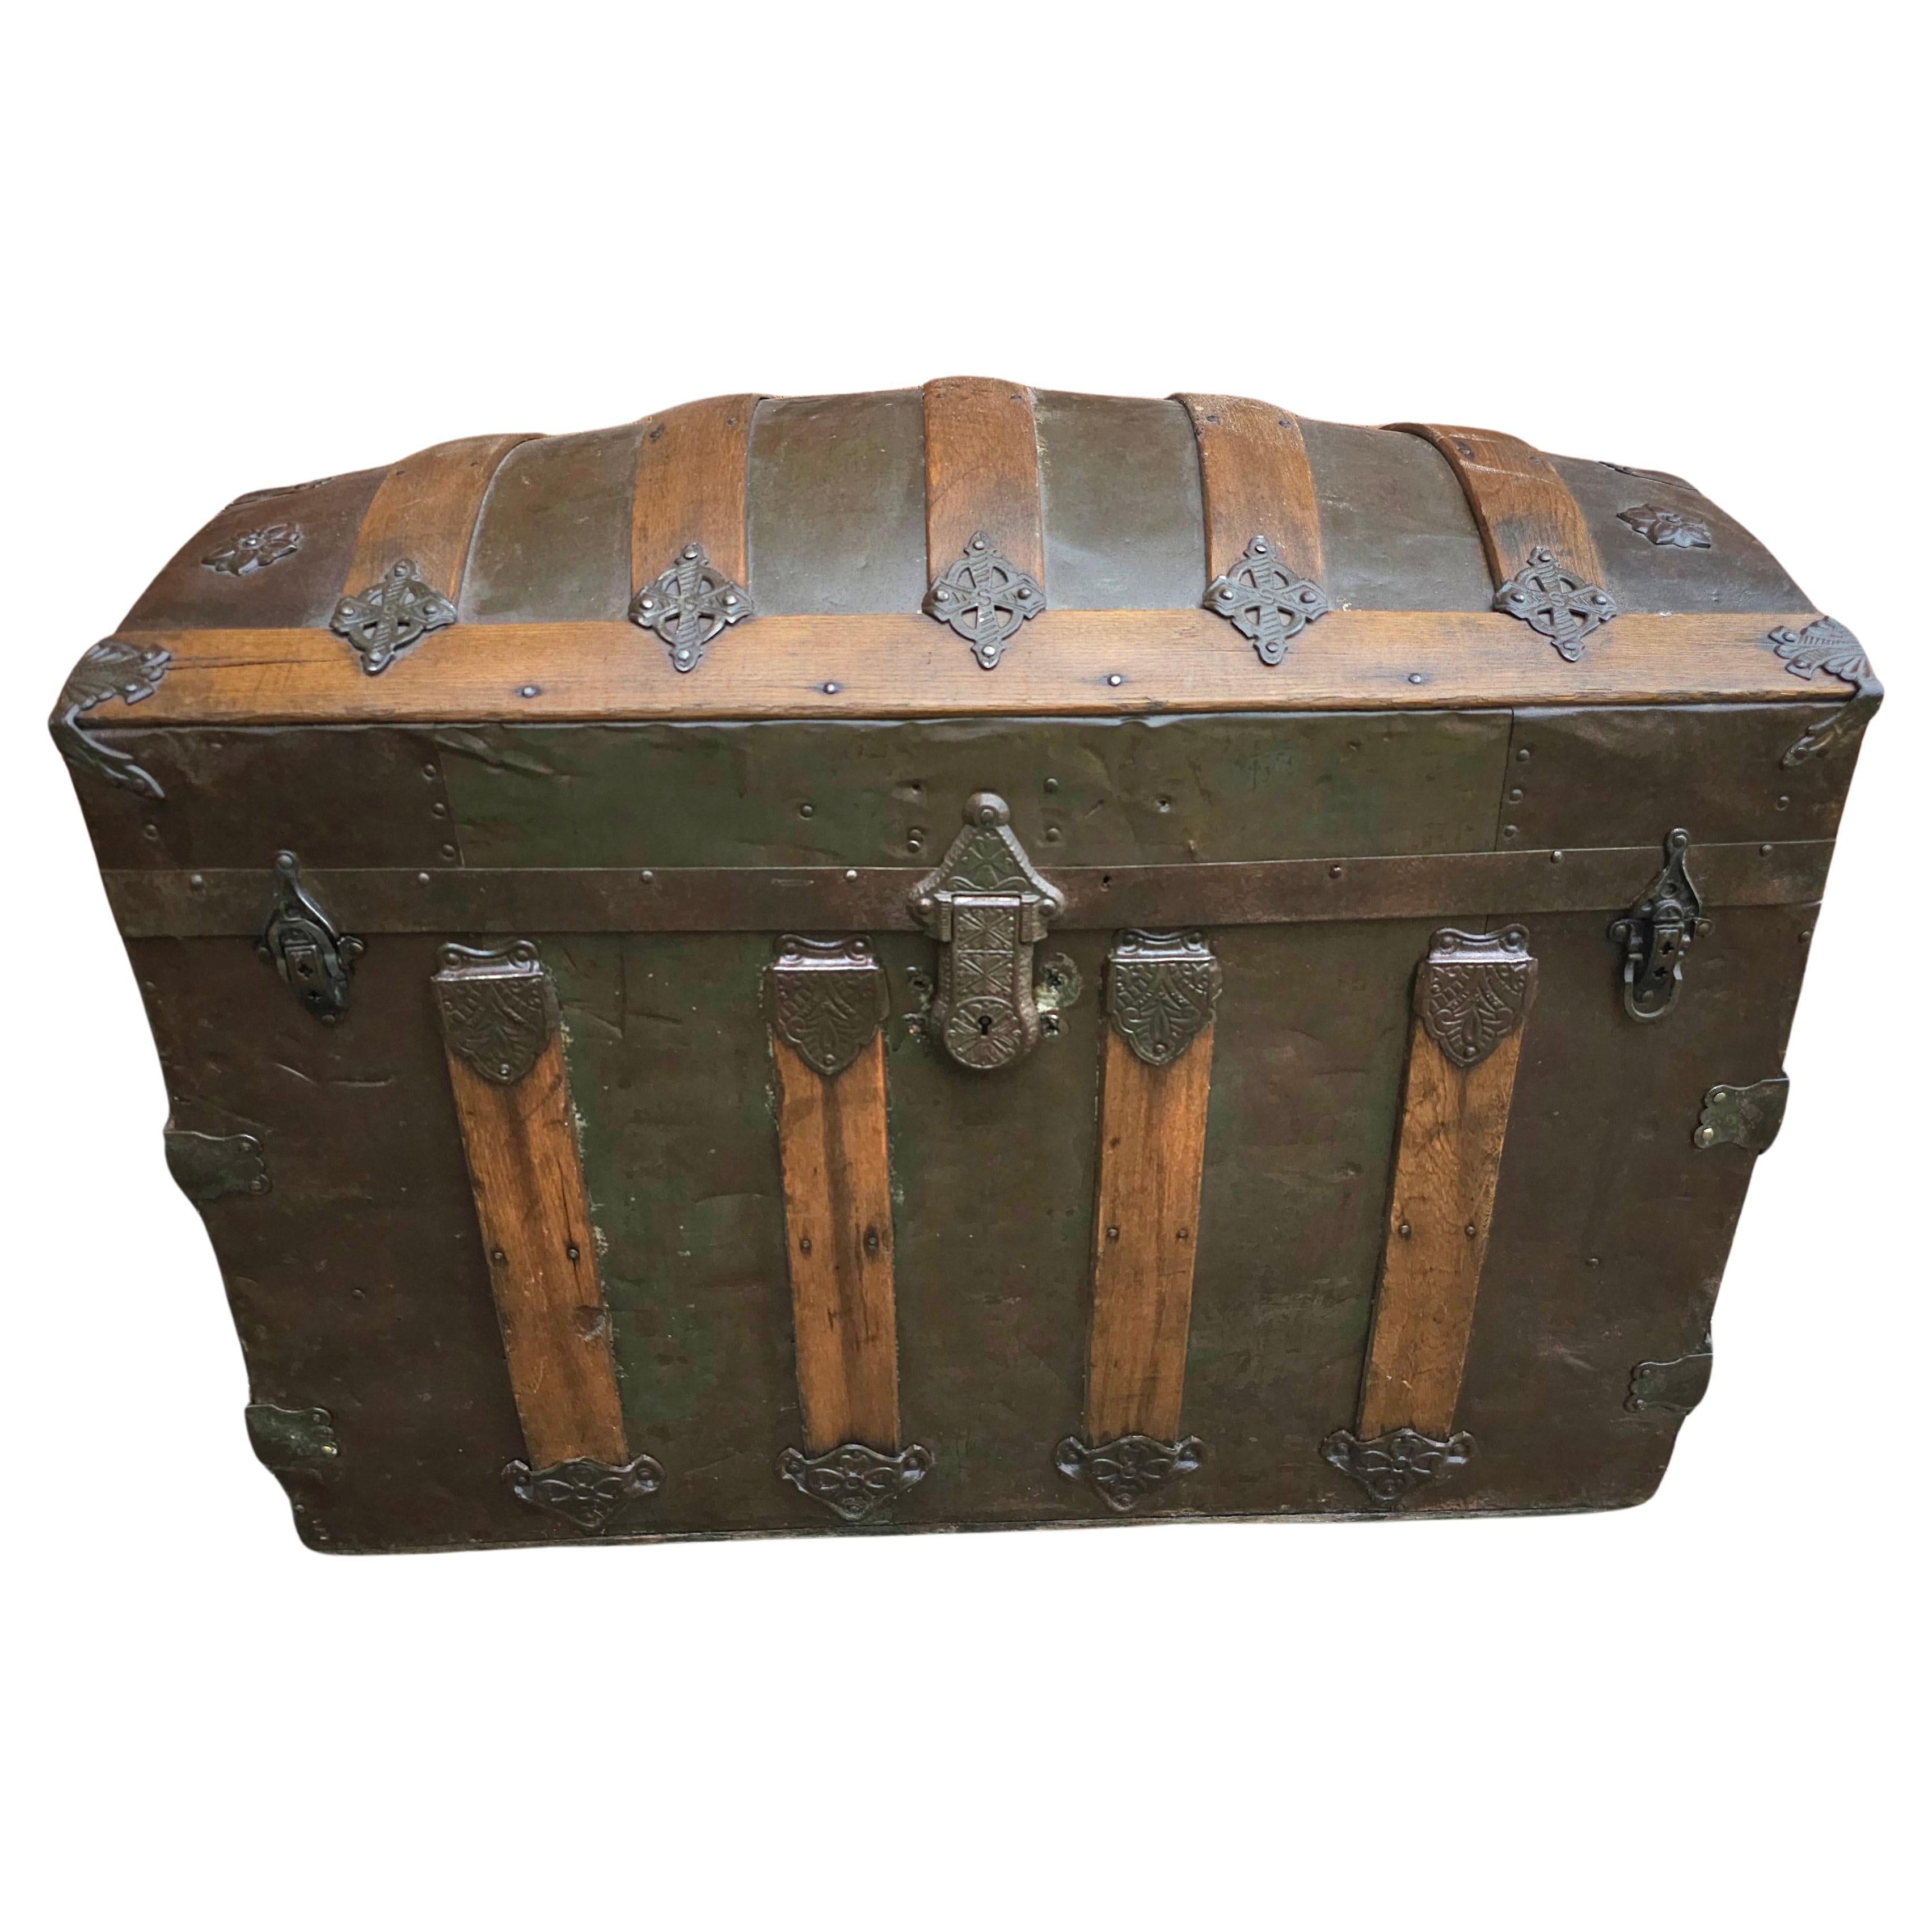 19th C. Refurbished and ReUpholstered Dome Top Metal & Wood Bound Blanket Chest For Sale